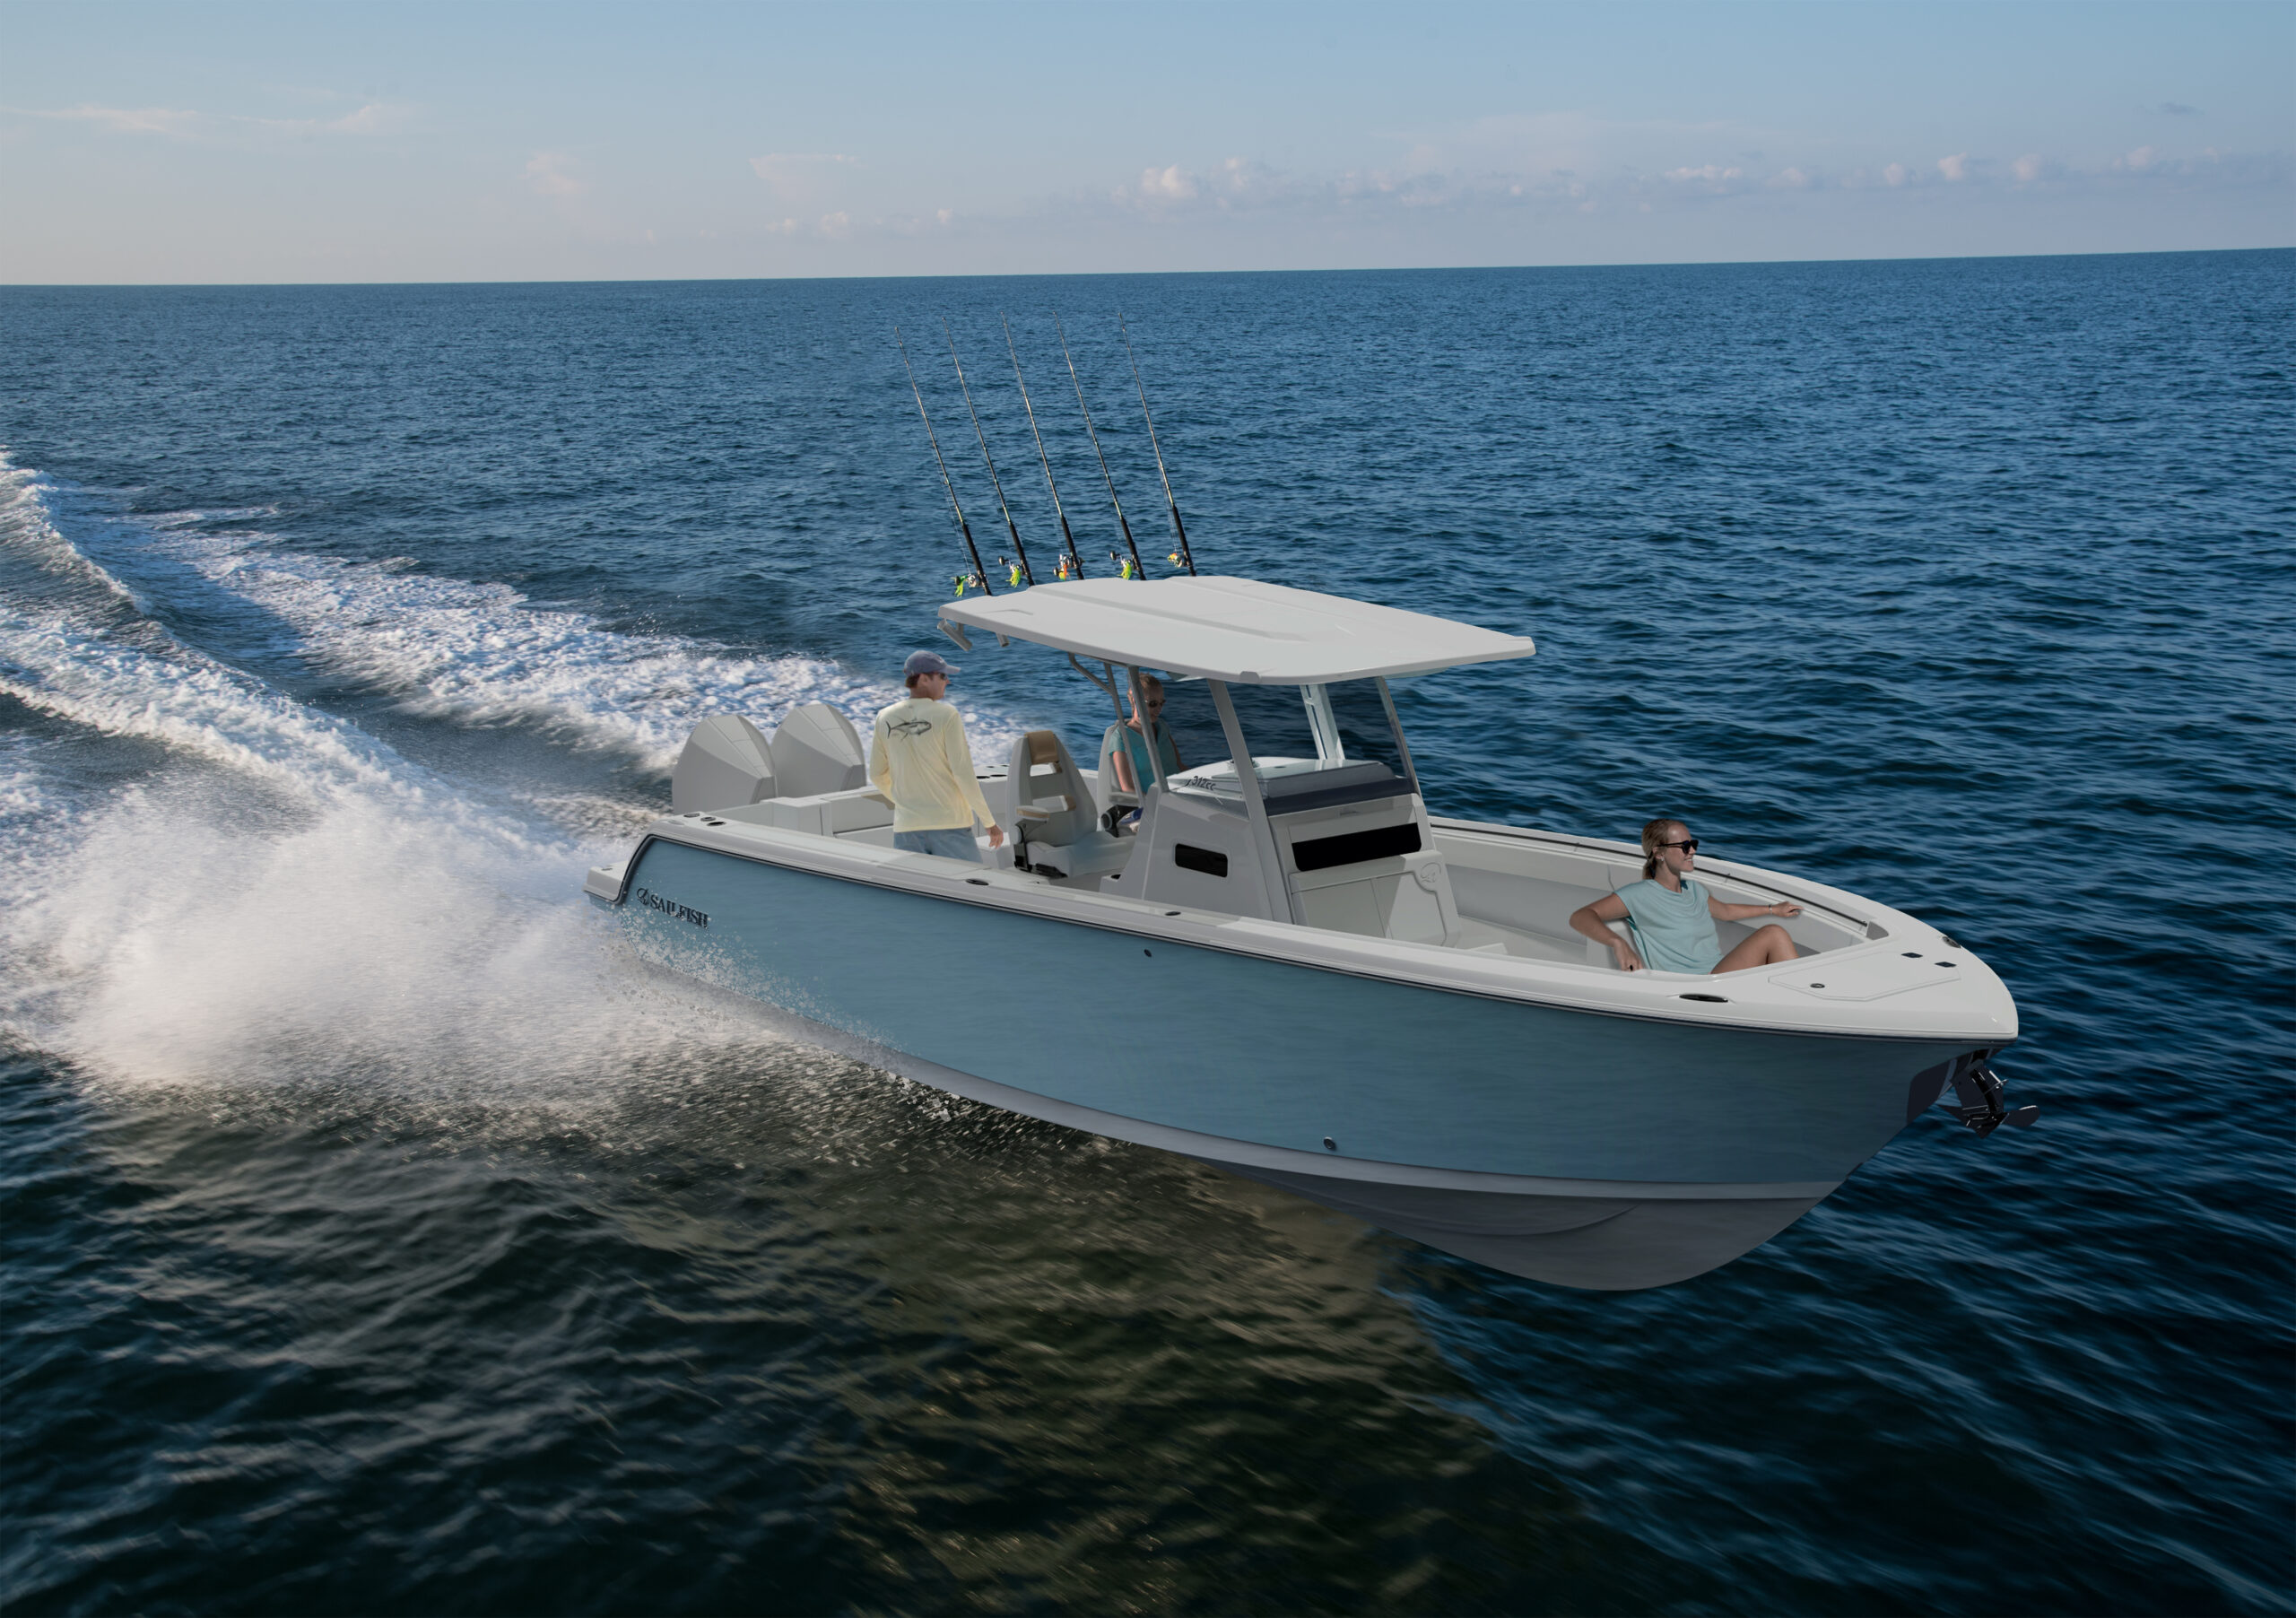 The New Sailfish 312 Center Console Sailfish Has Everything You Need